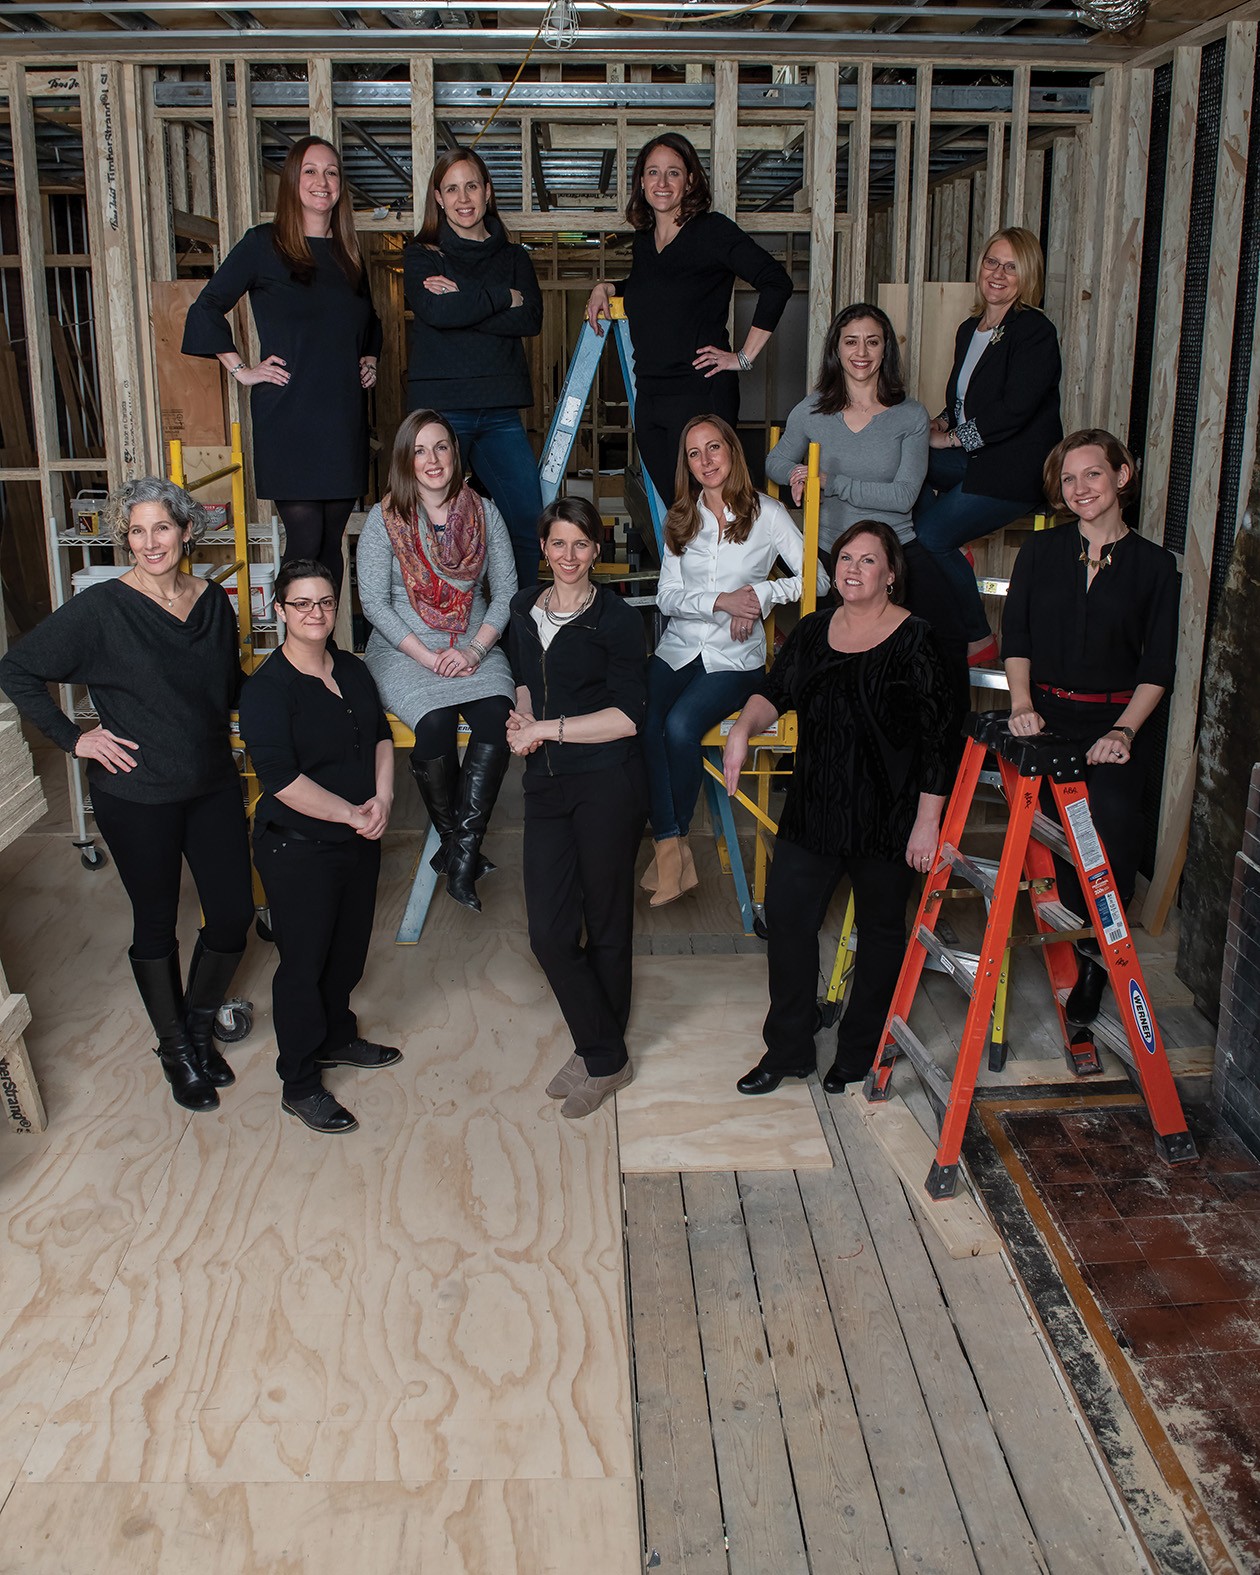 The Faces Of Women In Design